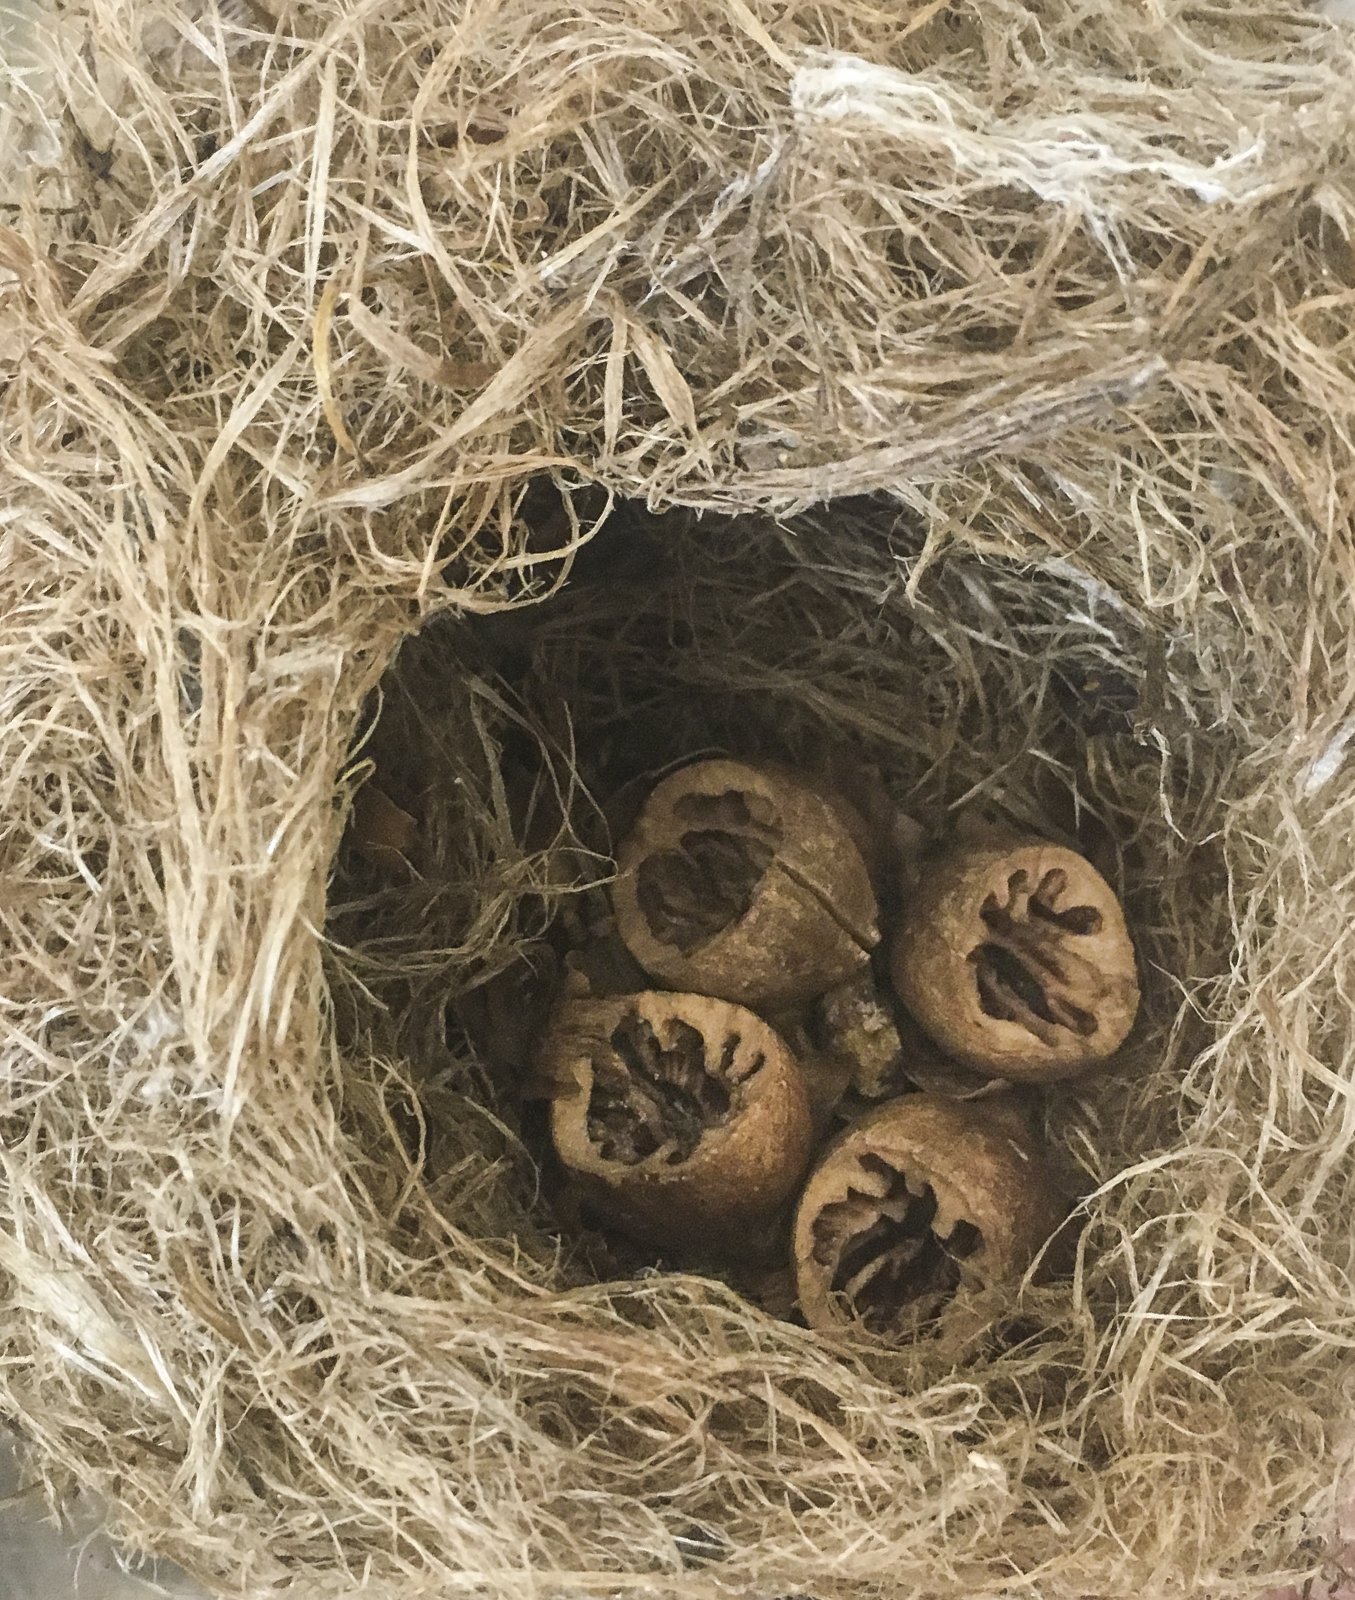 Hickory nuts with characteristic circular chew marks found in a nest inside a nest box. Photo courtesy Roads End Naturalist